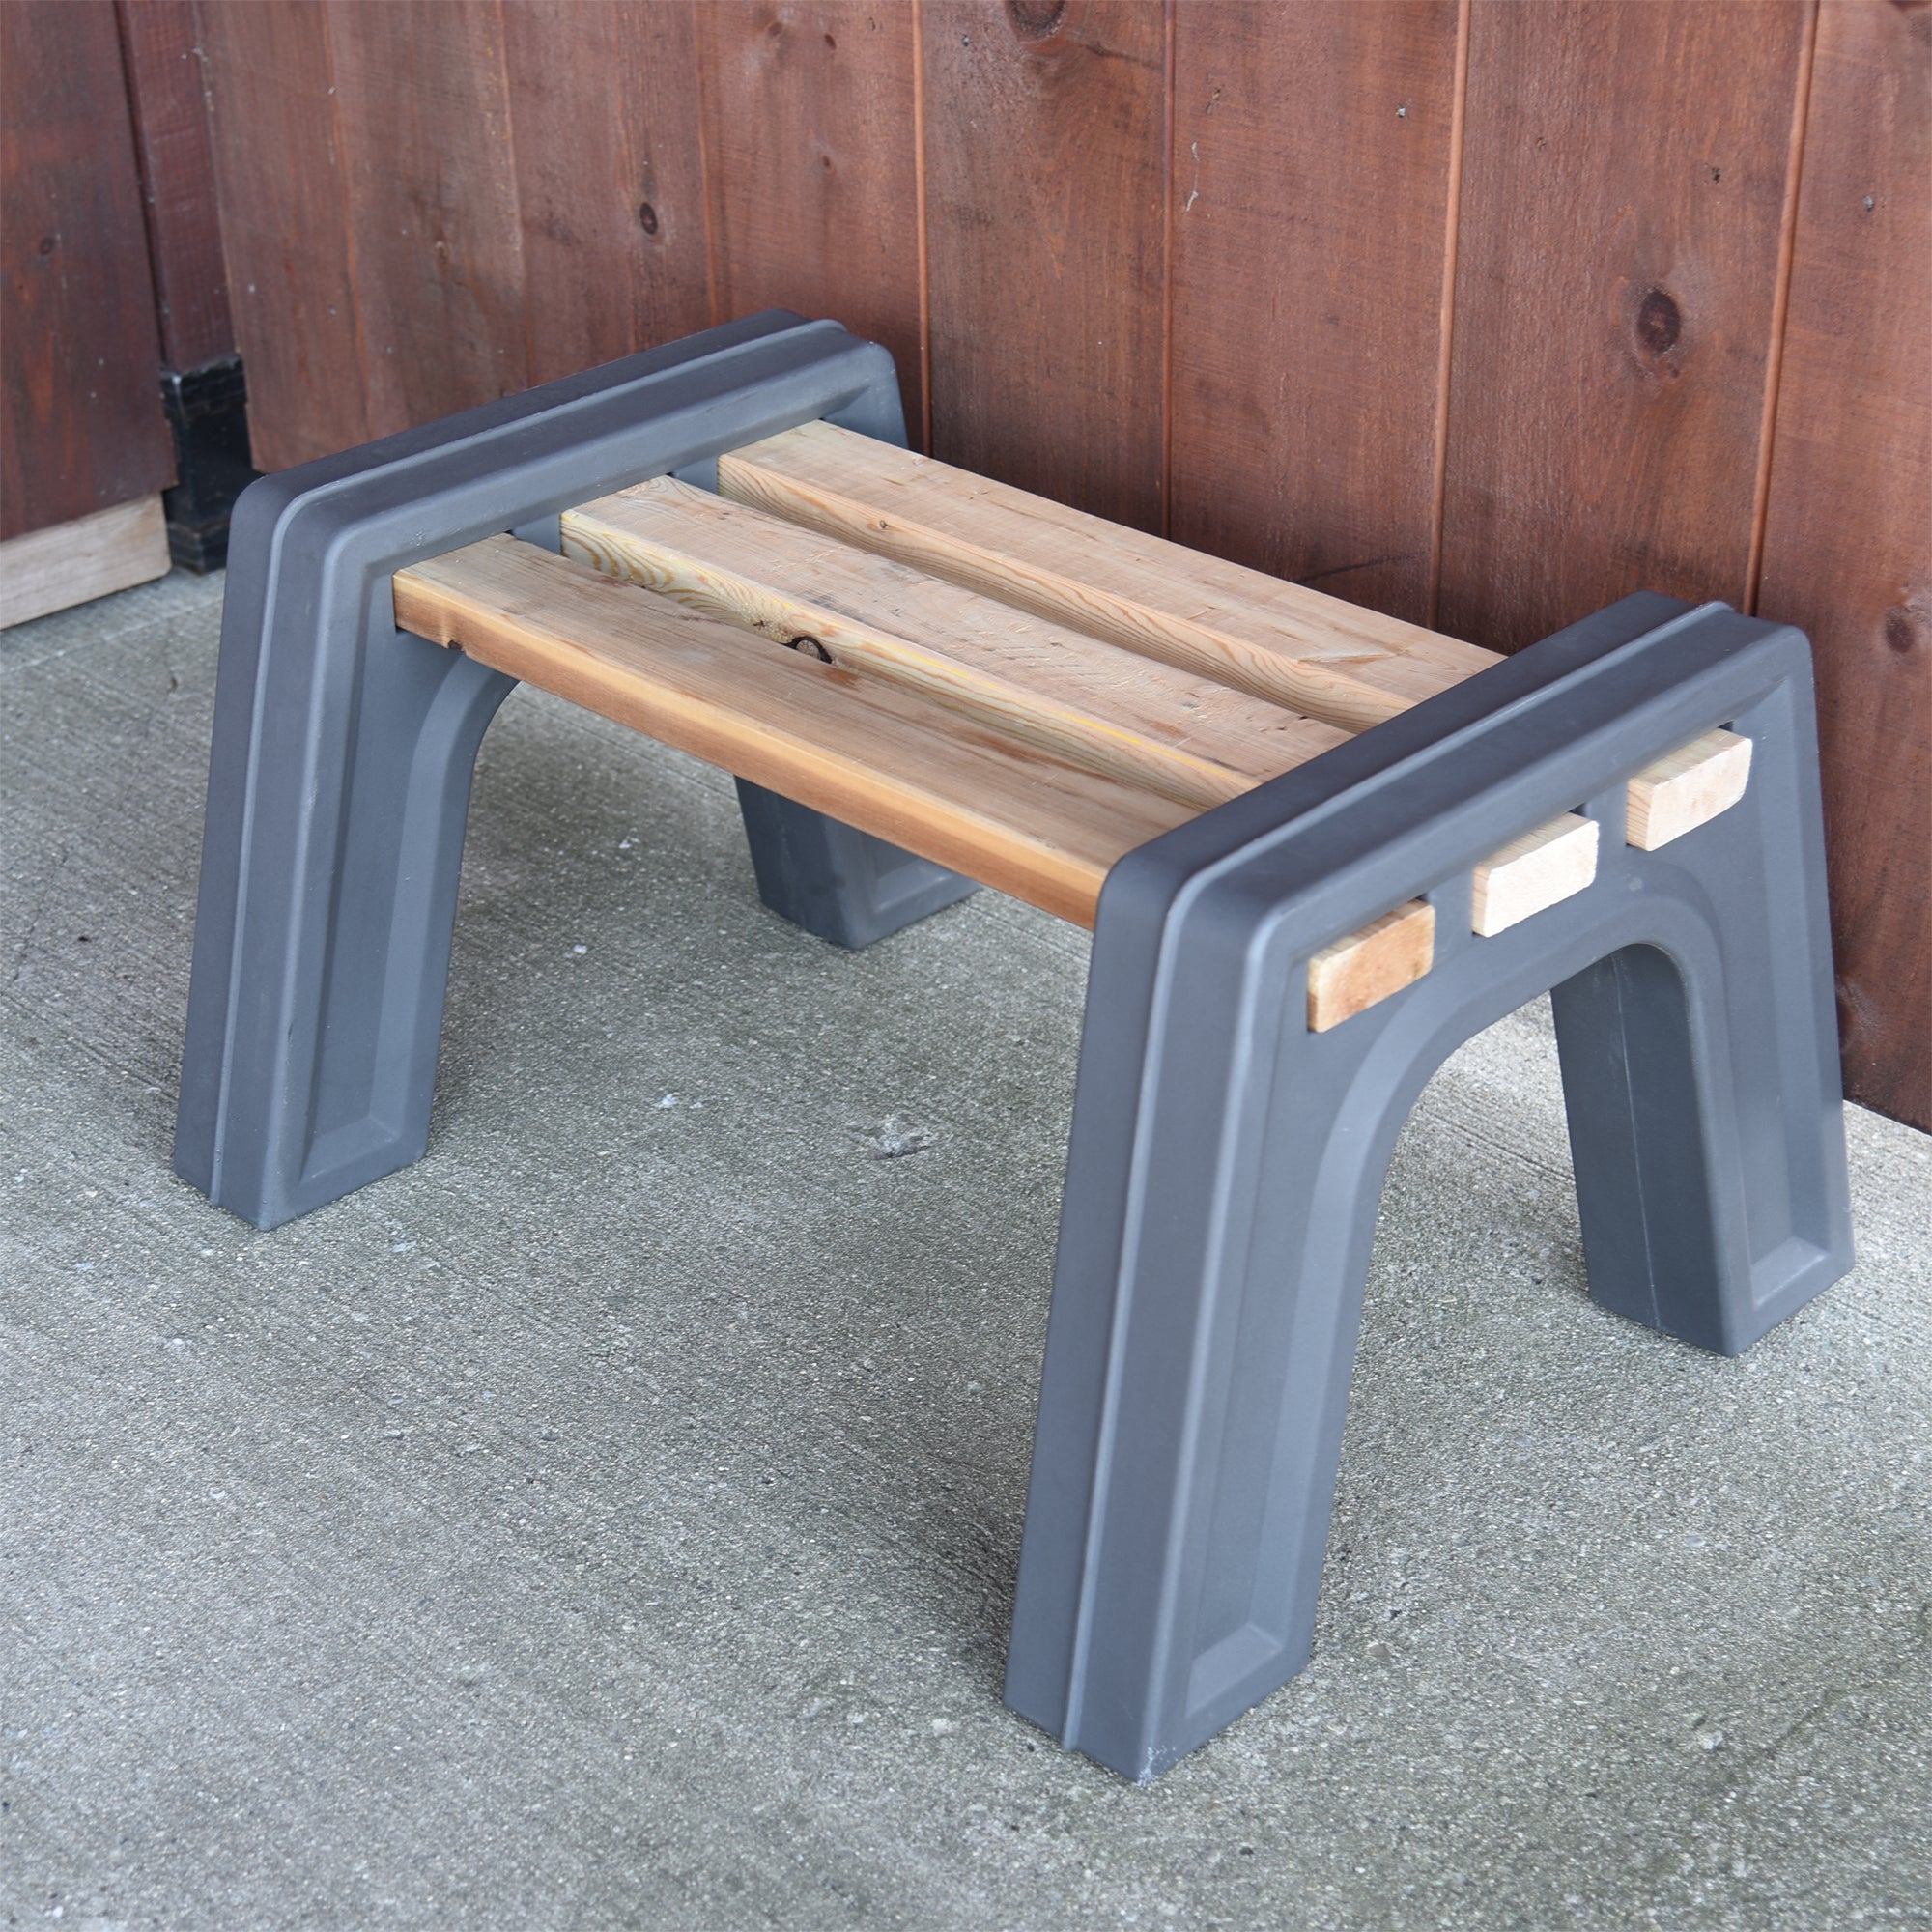 Graphite backless bench with wood against a wood wall